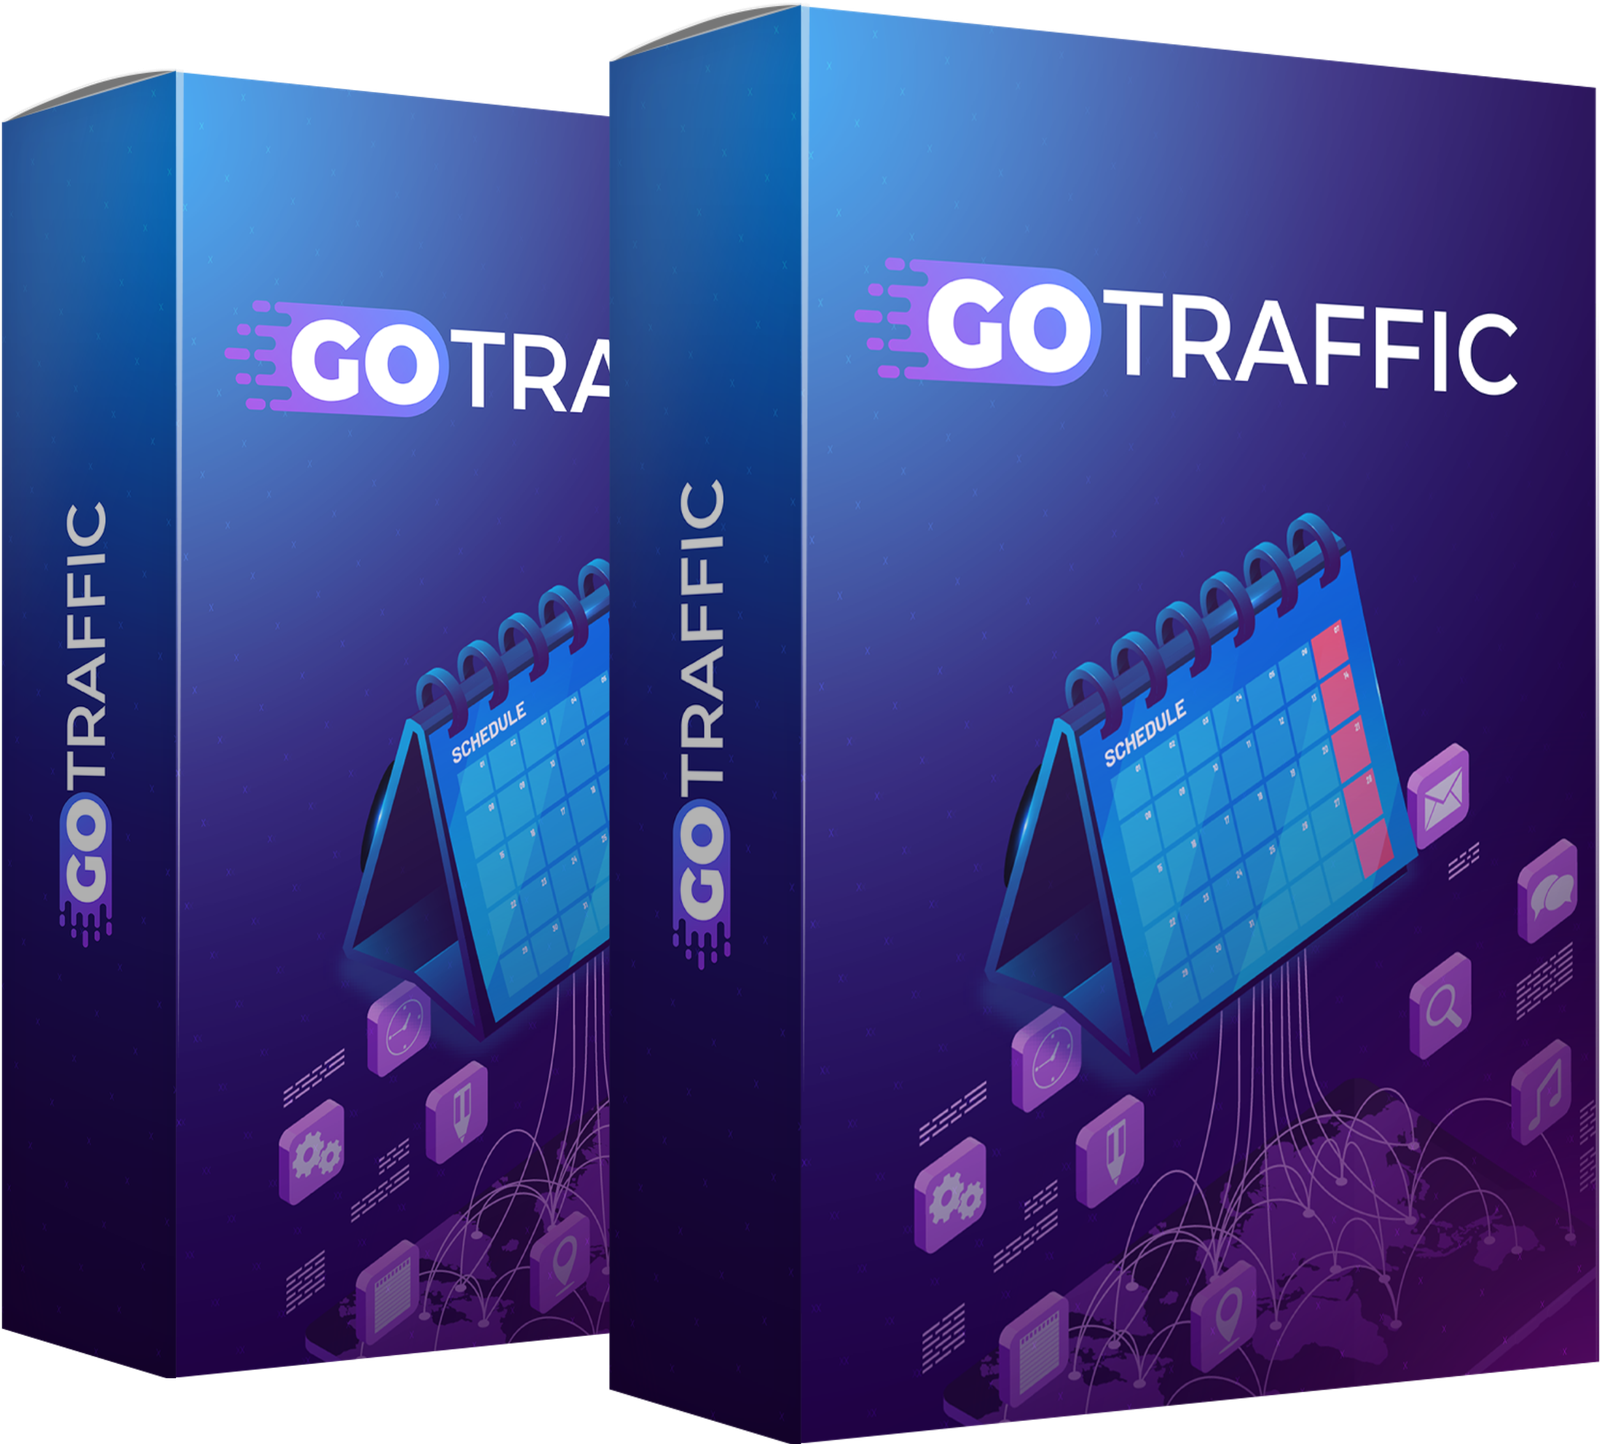 GOTRAFFIC REVIEW (Real) Live demo, Coupon Code, features & benefits, pros and cons, OTO/upsell details